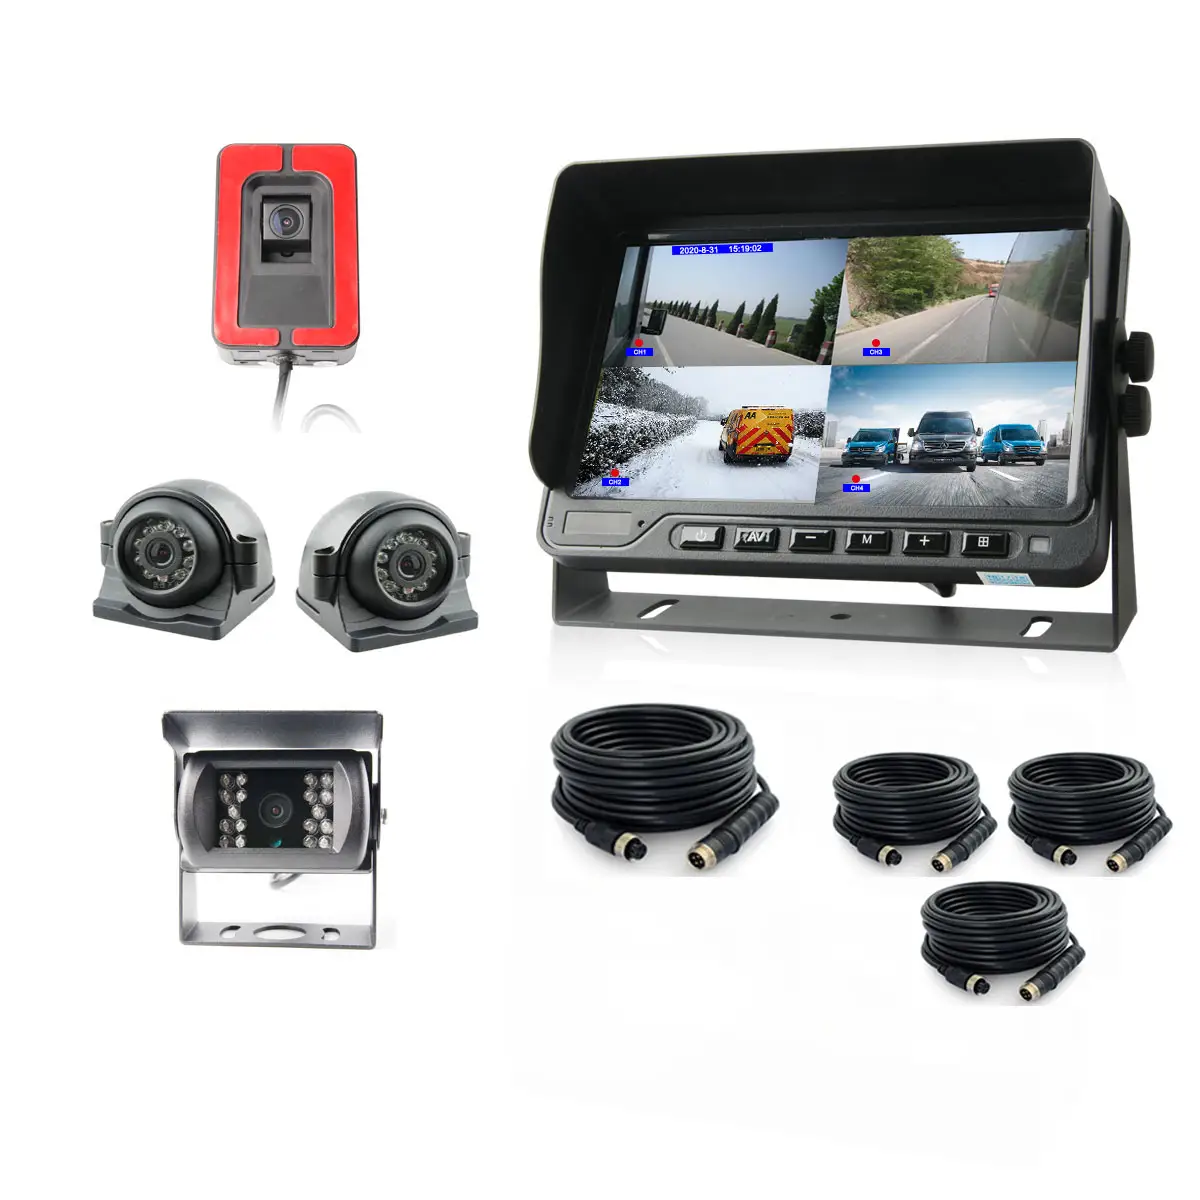 Hot Sale High Quality IP69K 120 Degree Wide Angle Bus Truck Rear View Camera Car With Mirror Image For Reversing